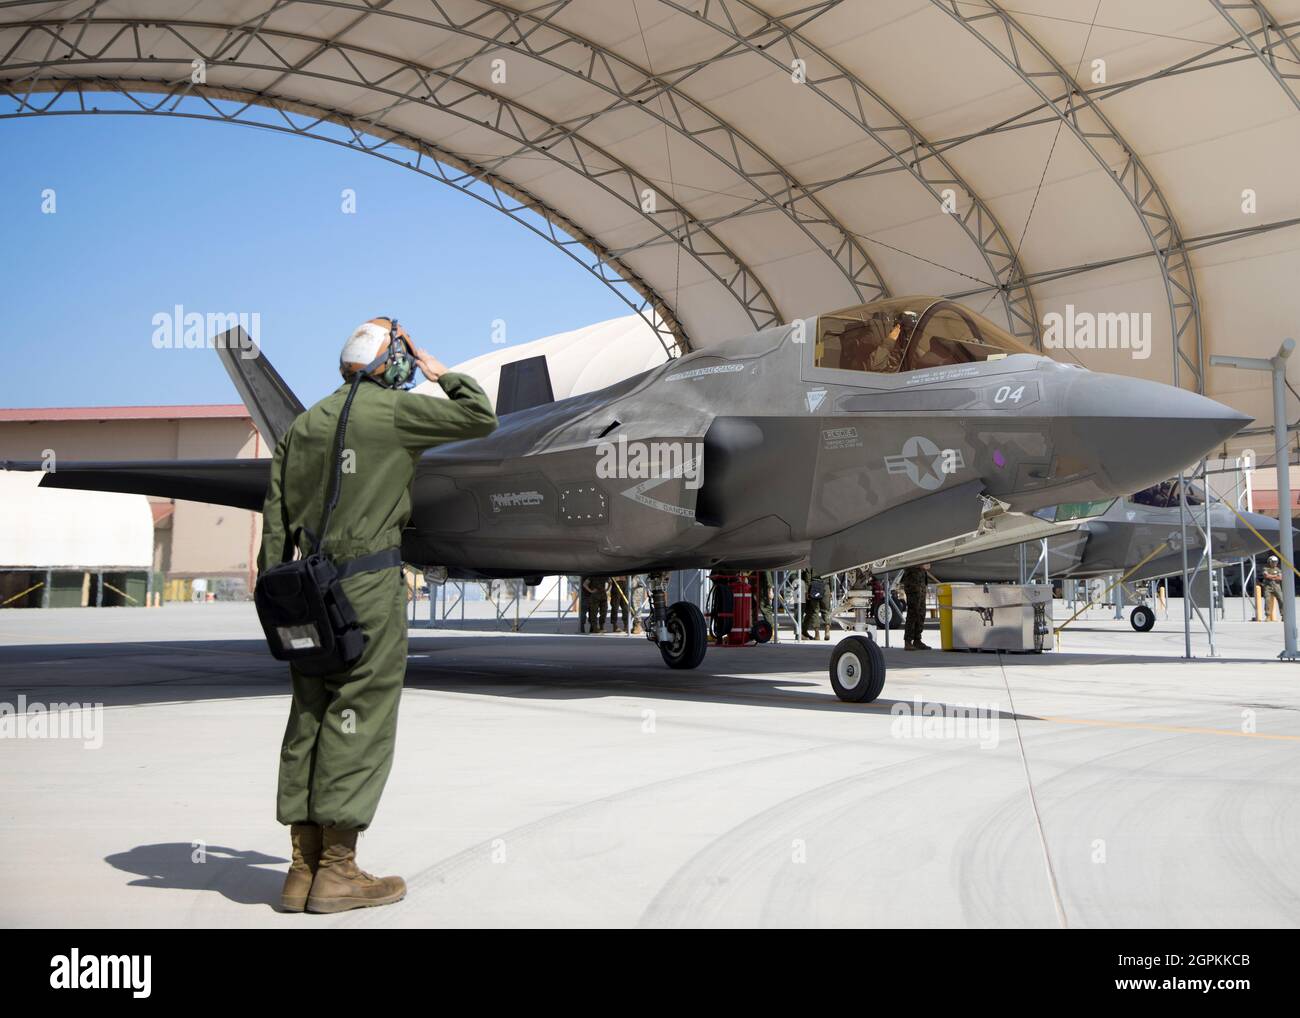 A U.S. Marine with Marine Fighter Attack Squadron (VMFA) 225 salutes Lt. Col. Alexander Goodno, commanding officer of VMFA 225, before takeoff at Marine Corps Air Station Yuma, Ariz., September 25, 2021. VMFA-225 participated in their first flight as an F-35B squadron. This marked the end of the first phase in the transition from a legacy F/A-18D Hornet squadron to an F-35B squadron. (U.S. Marine Corps Photo by Lance Cpl. Matthew Romonoyske-Bean) Stock Photo